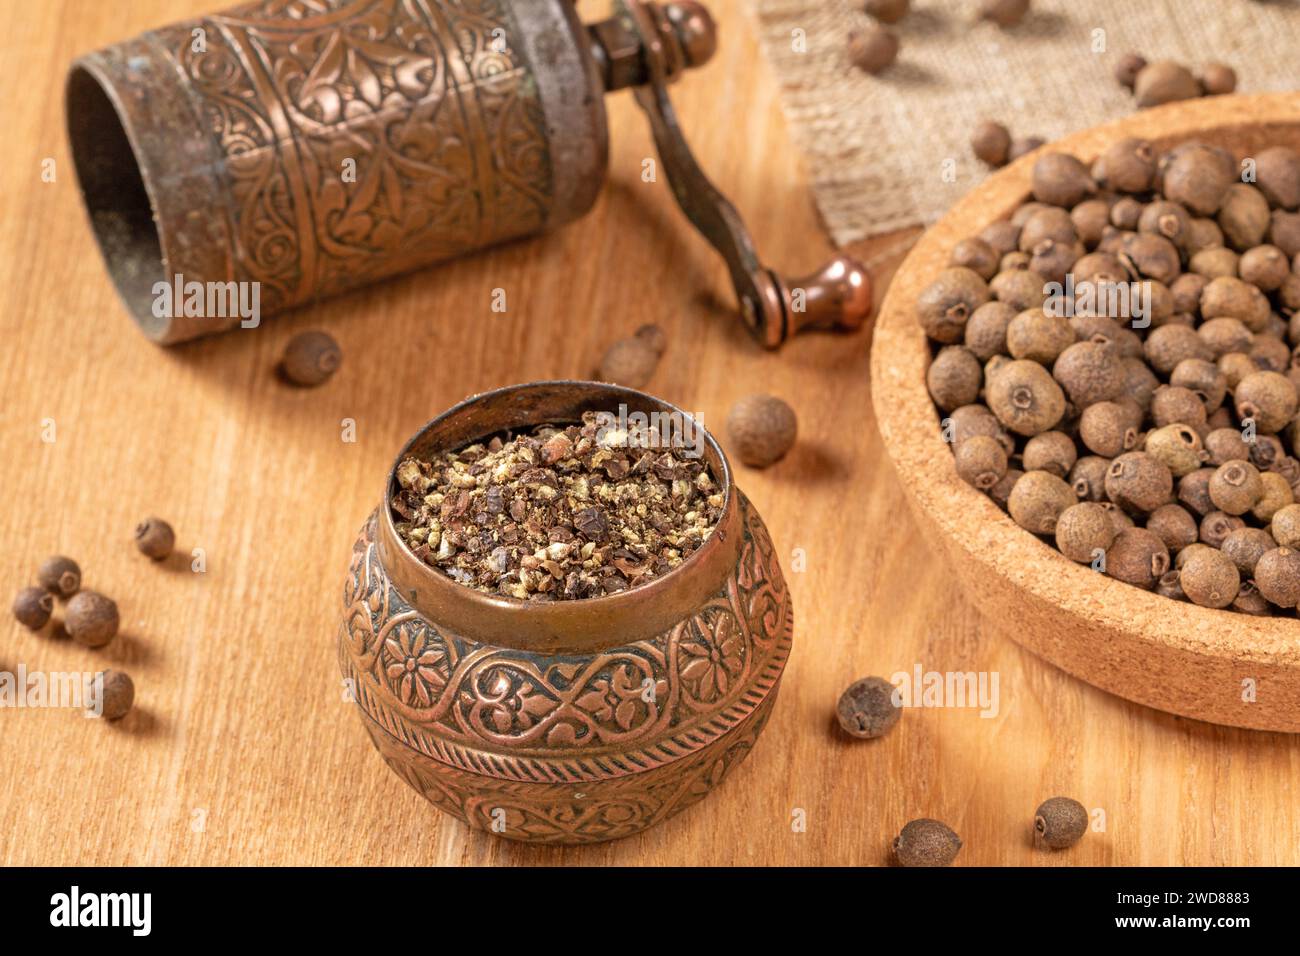 A close-up of a traditional black pepper mill filled with whole peppercorns, resting on a textured wooden background. The warm lighting enhances the r Stock Photo